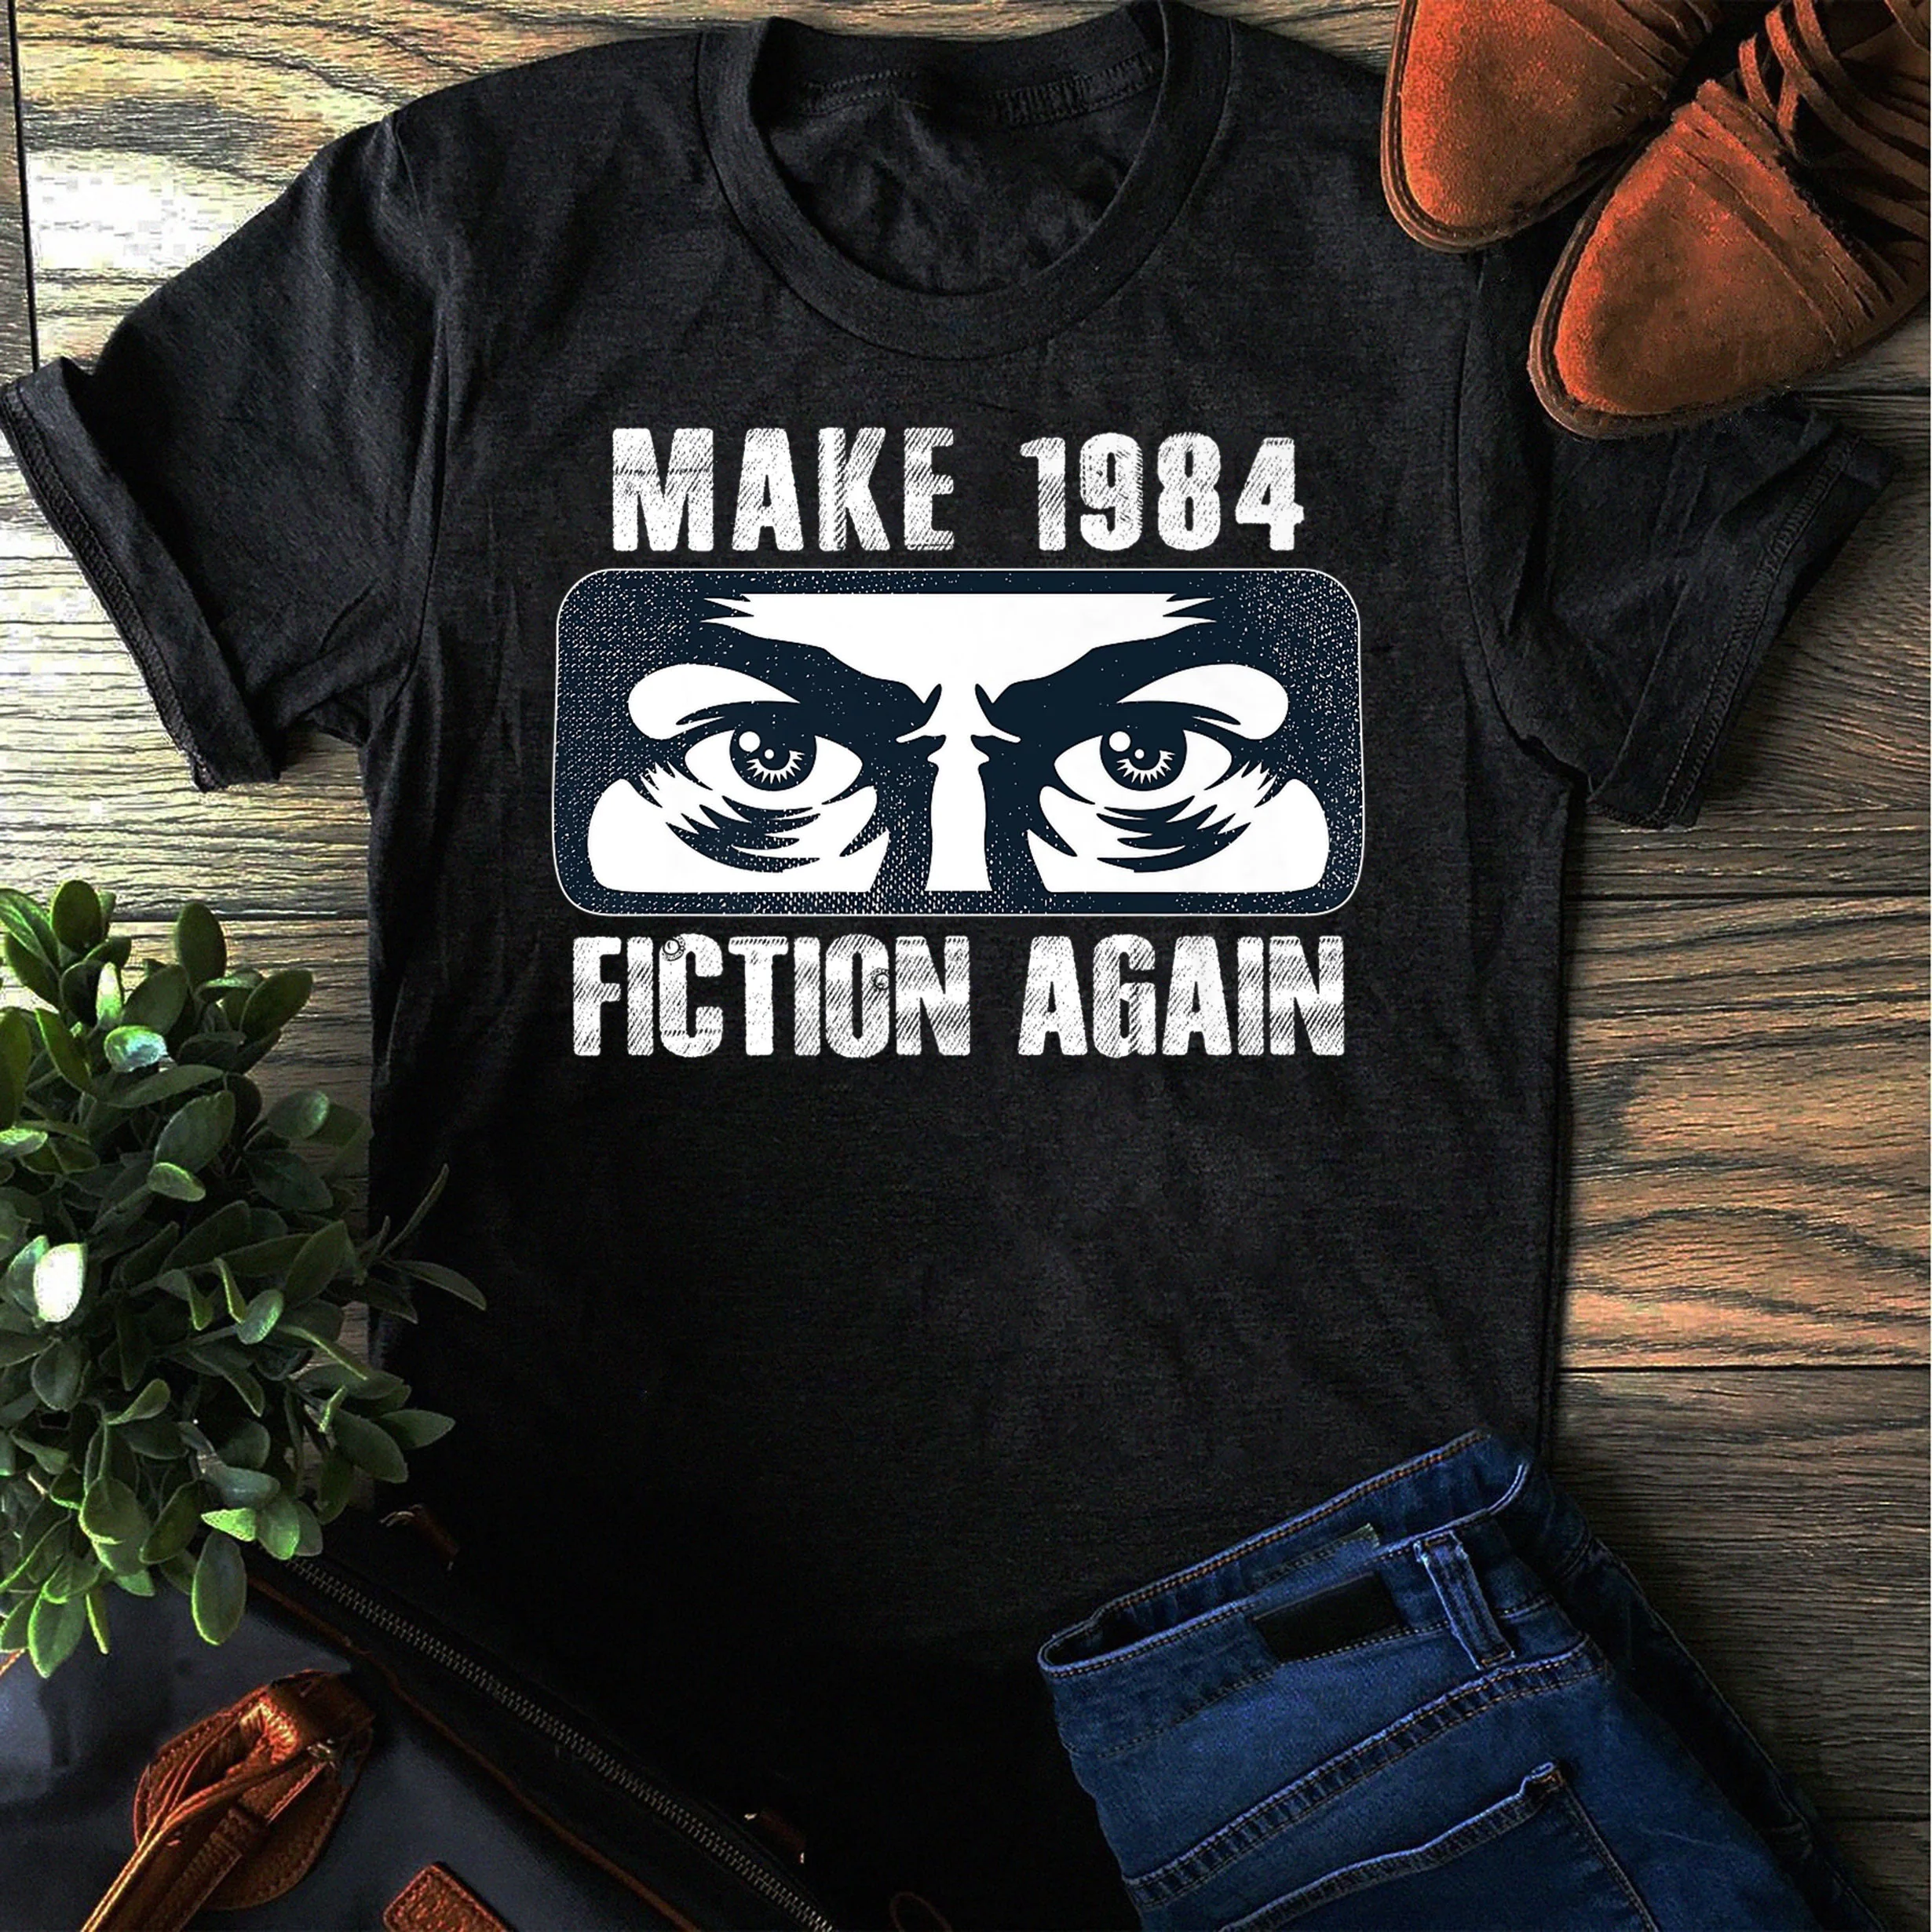 Make 1984 Fiction Again Big Brother Is Watching You Unisex T-Shirt